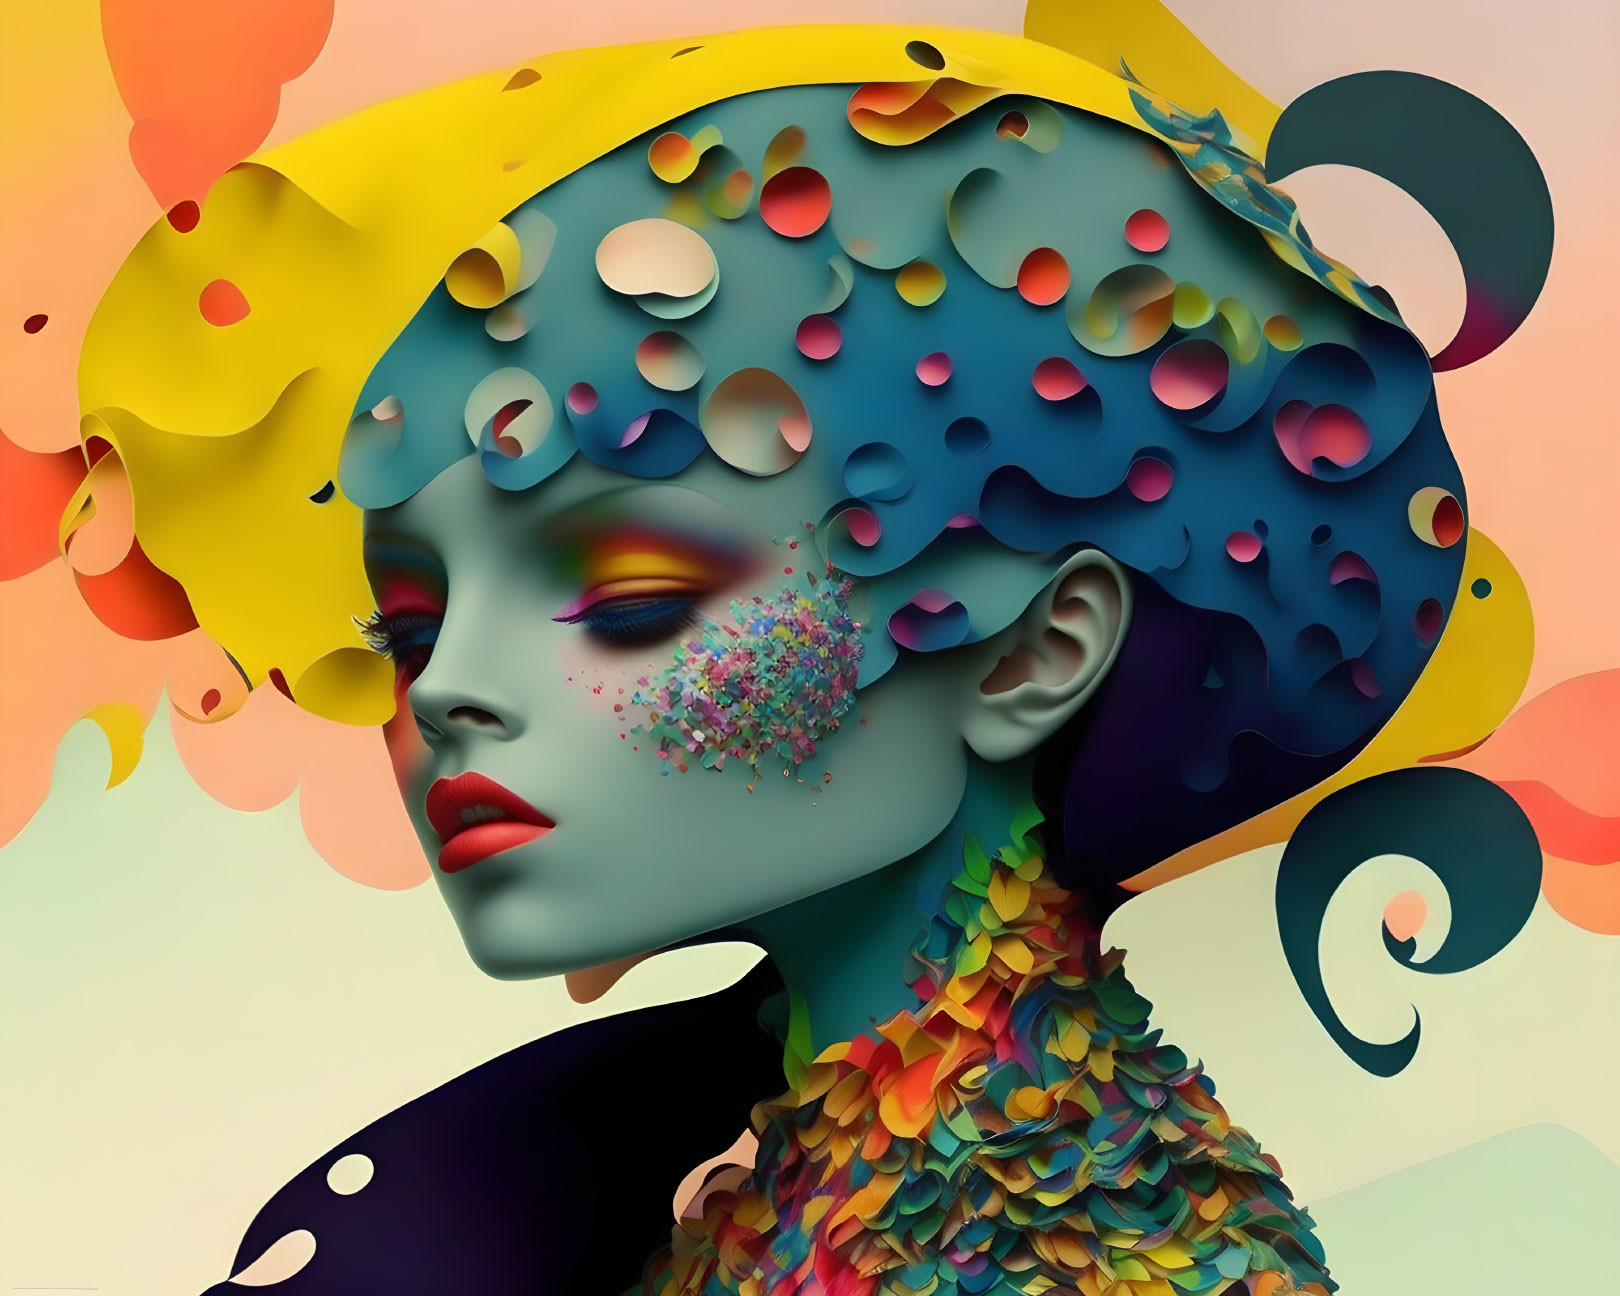 Colorful Abstract Hairstyle and Vibrant Makeup Portrait